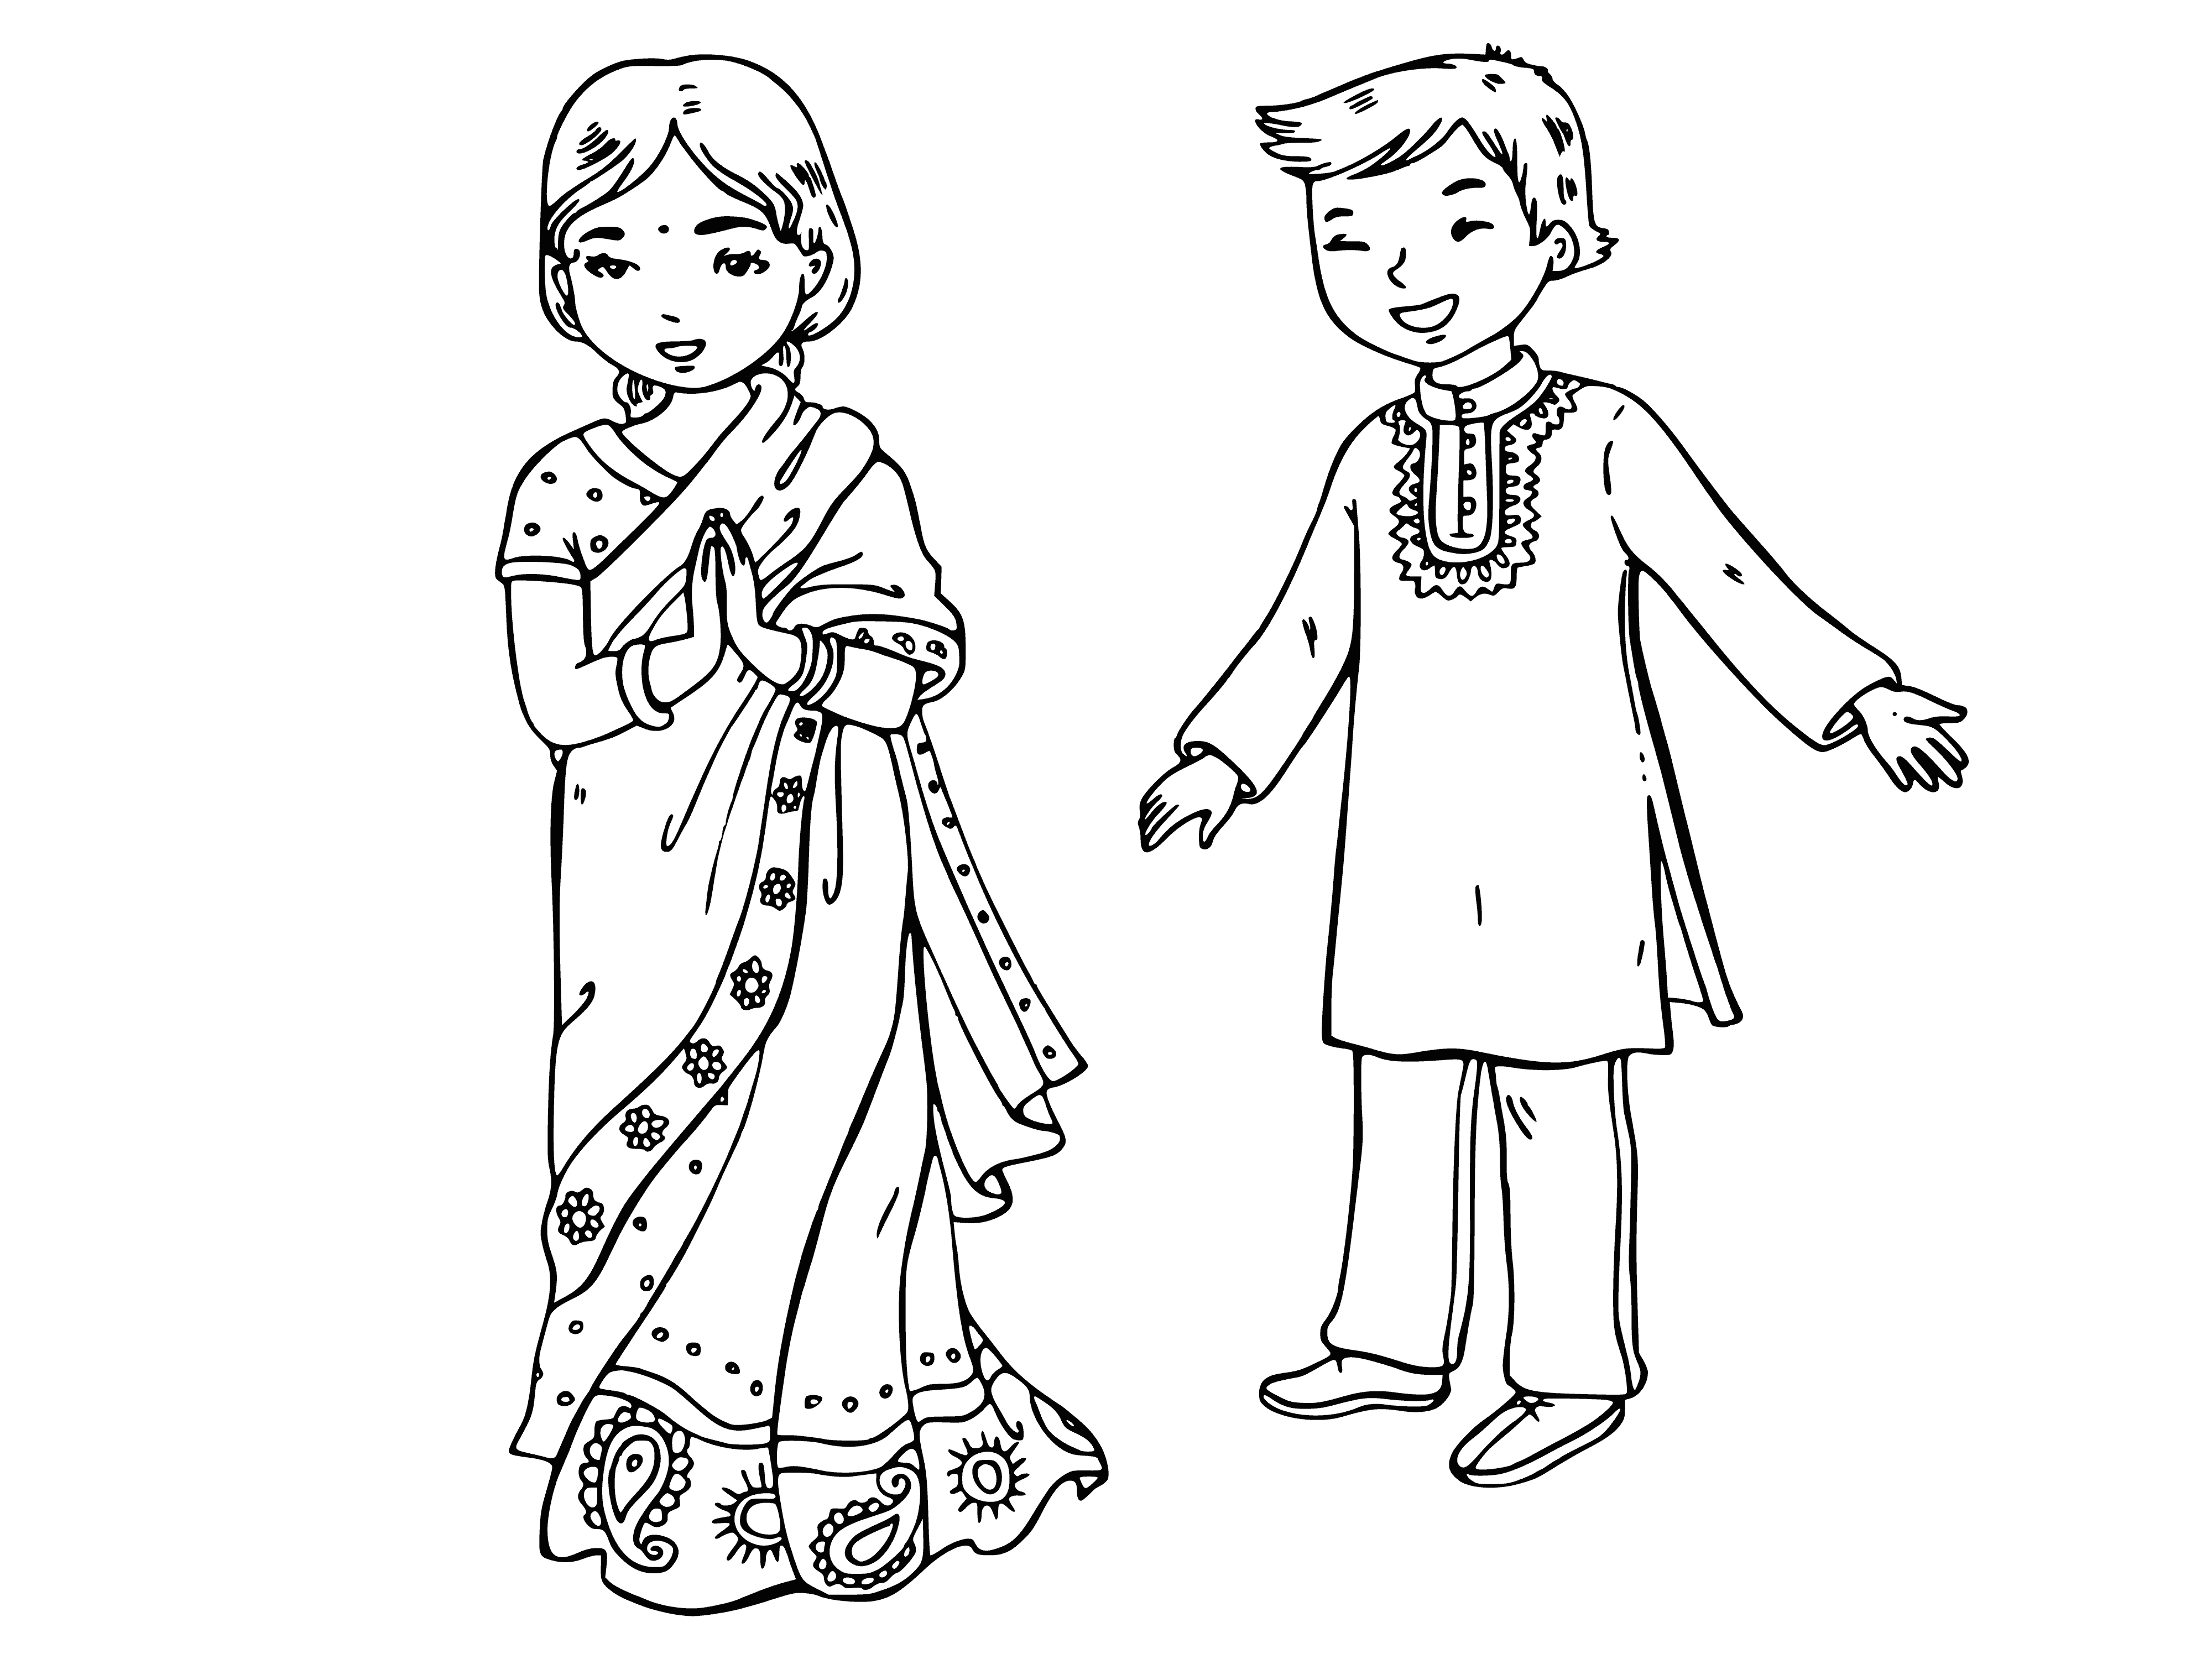 coloring page: Kids in Indian attire: girl in red & white sari w/ gold jewelry, boy in white tunic w/ gold trim & red scarf.